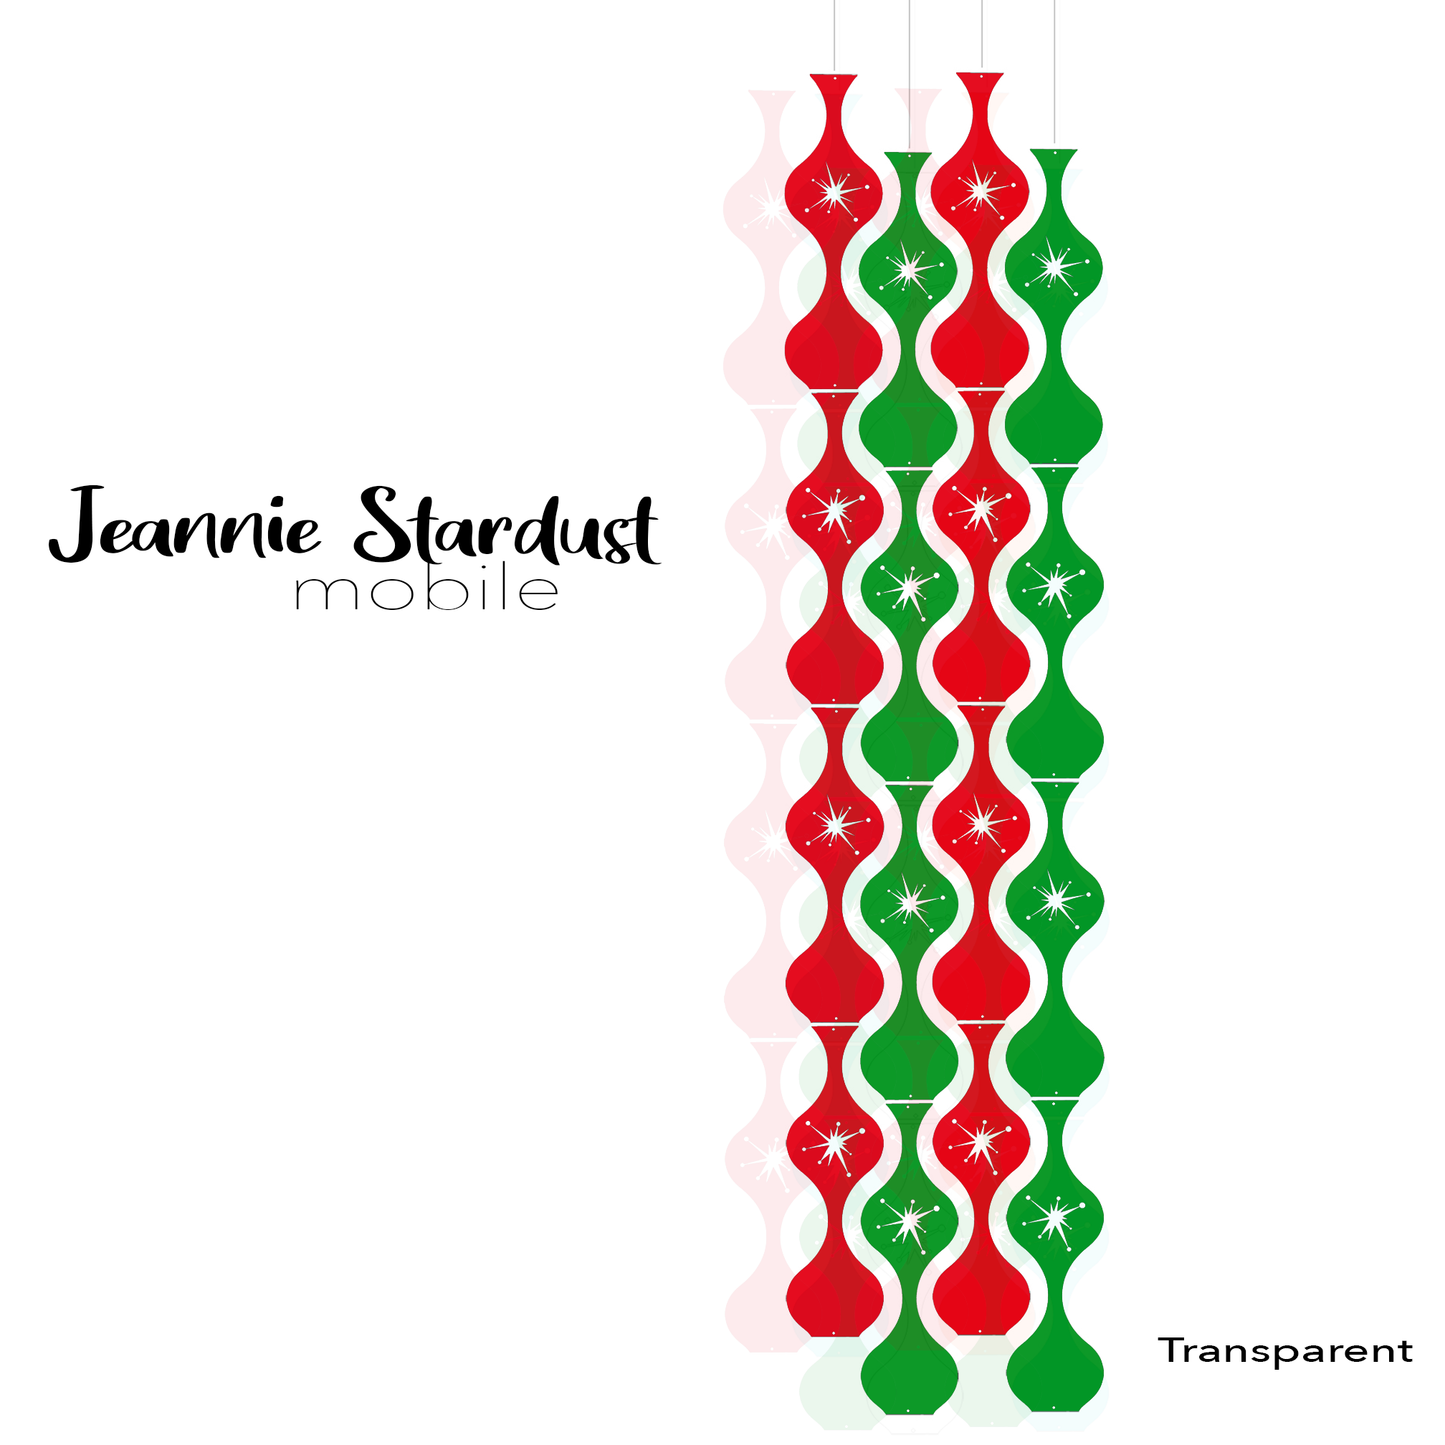 Jeannie Stardust Transparent Clear Red and Green Acrylic Mobile - DIY Kit - Featuring Starburst cutouts in the parts by AtomicMobiles.com